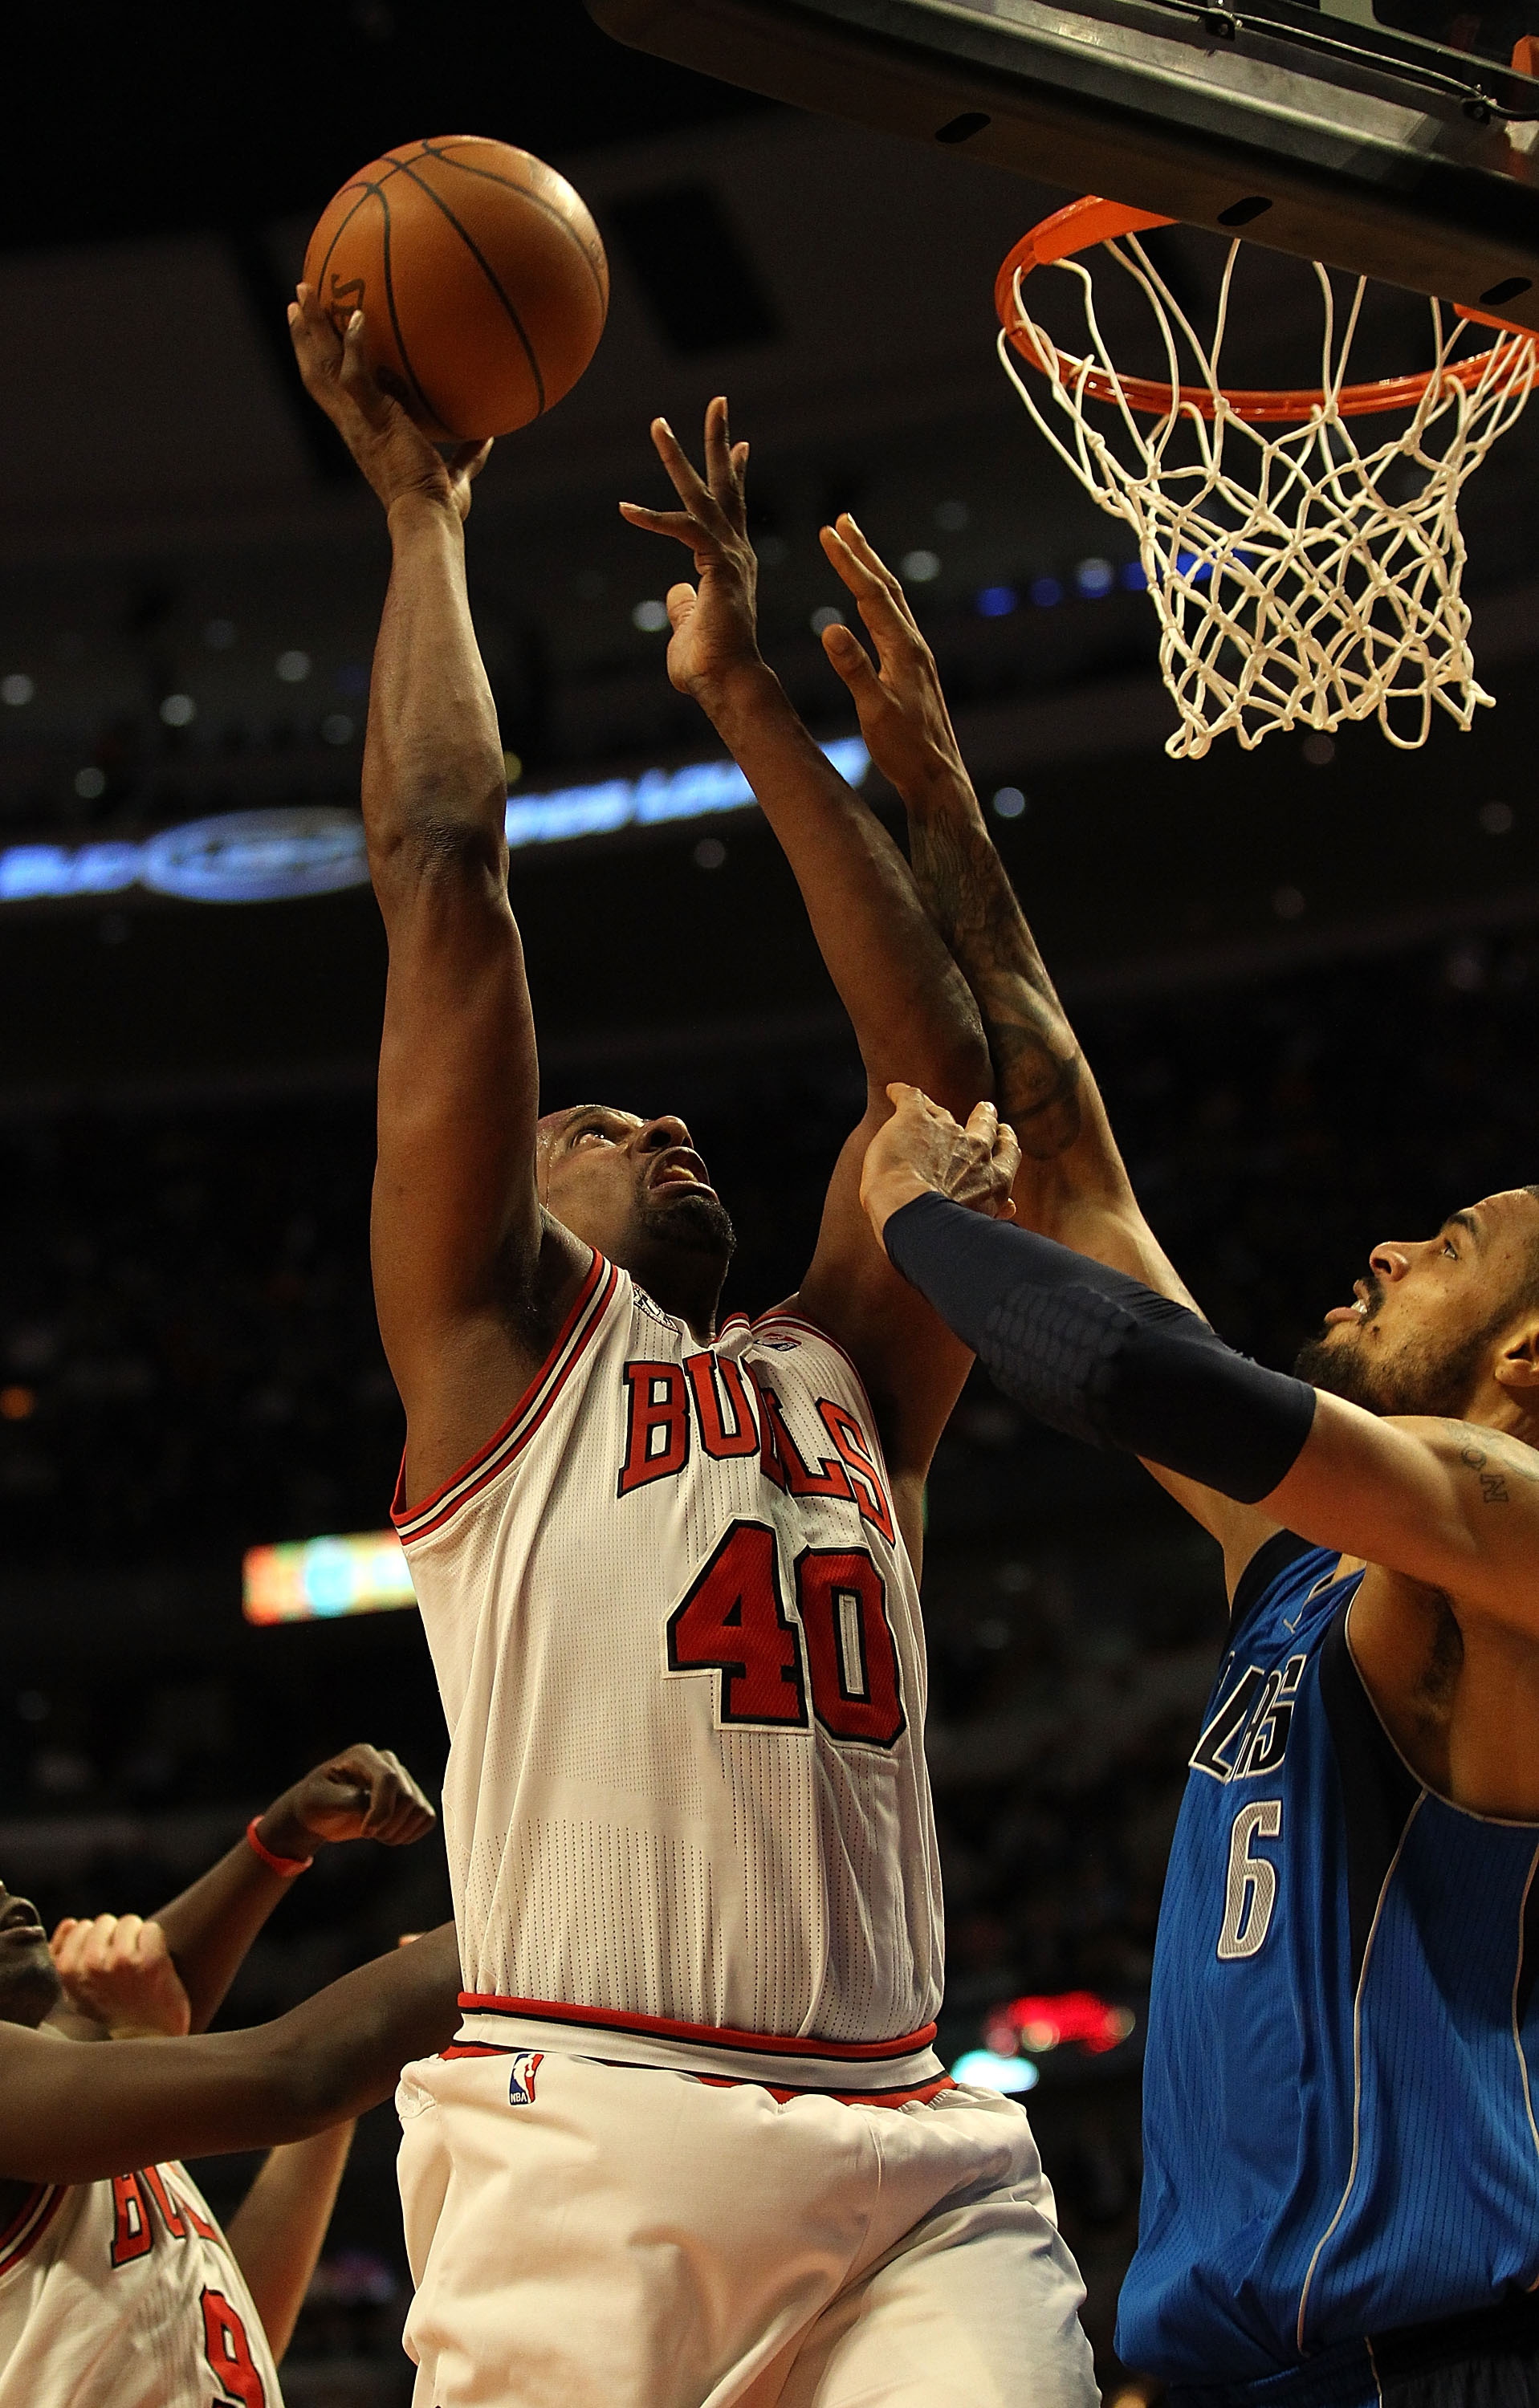 CHICAGO, IL - JANUARY 20: Kurt Thomas #40 of the Chicago Bulls goes up for a shot against Tyson Chandler #6 of the Dallas Mavericks at the United Center on January 20, 2011 in Chicago, Illinois. The Bulls defeated the Mavericks 82-77. NOTE TO USER: User e